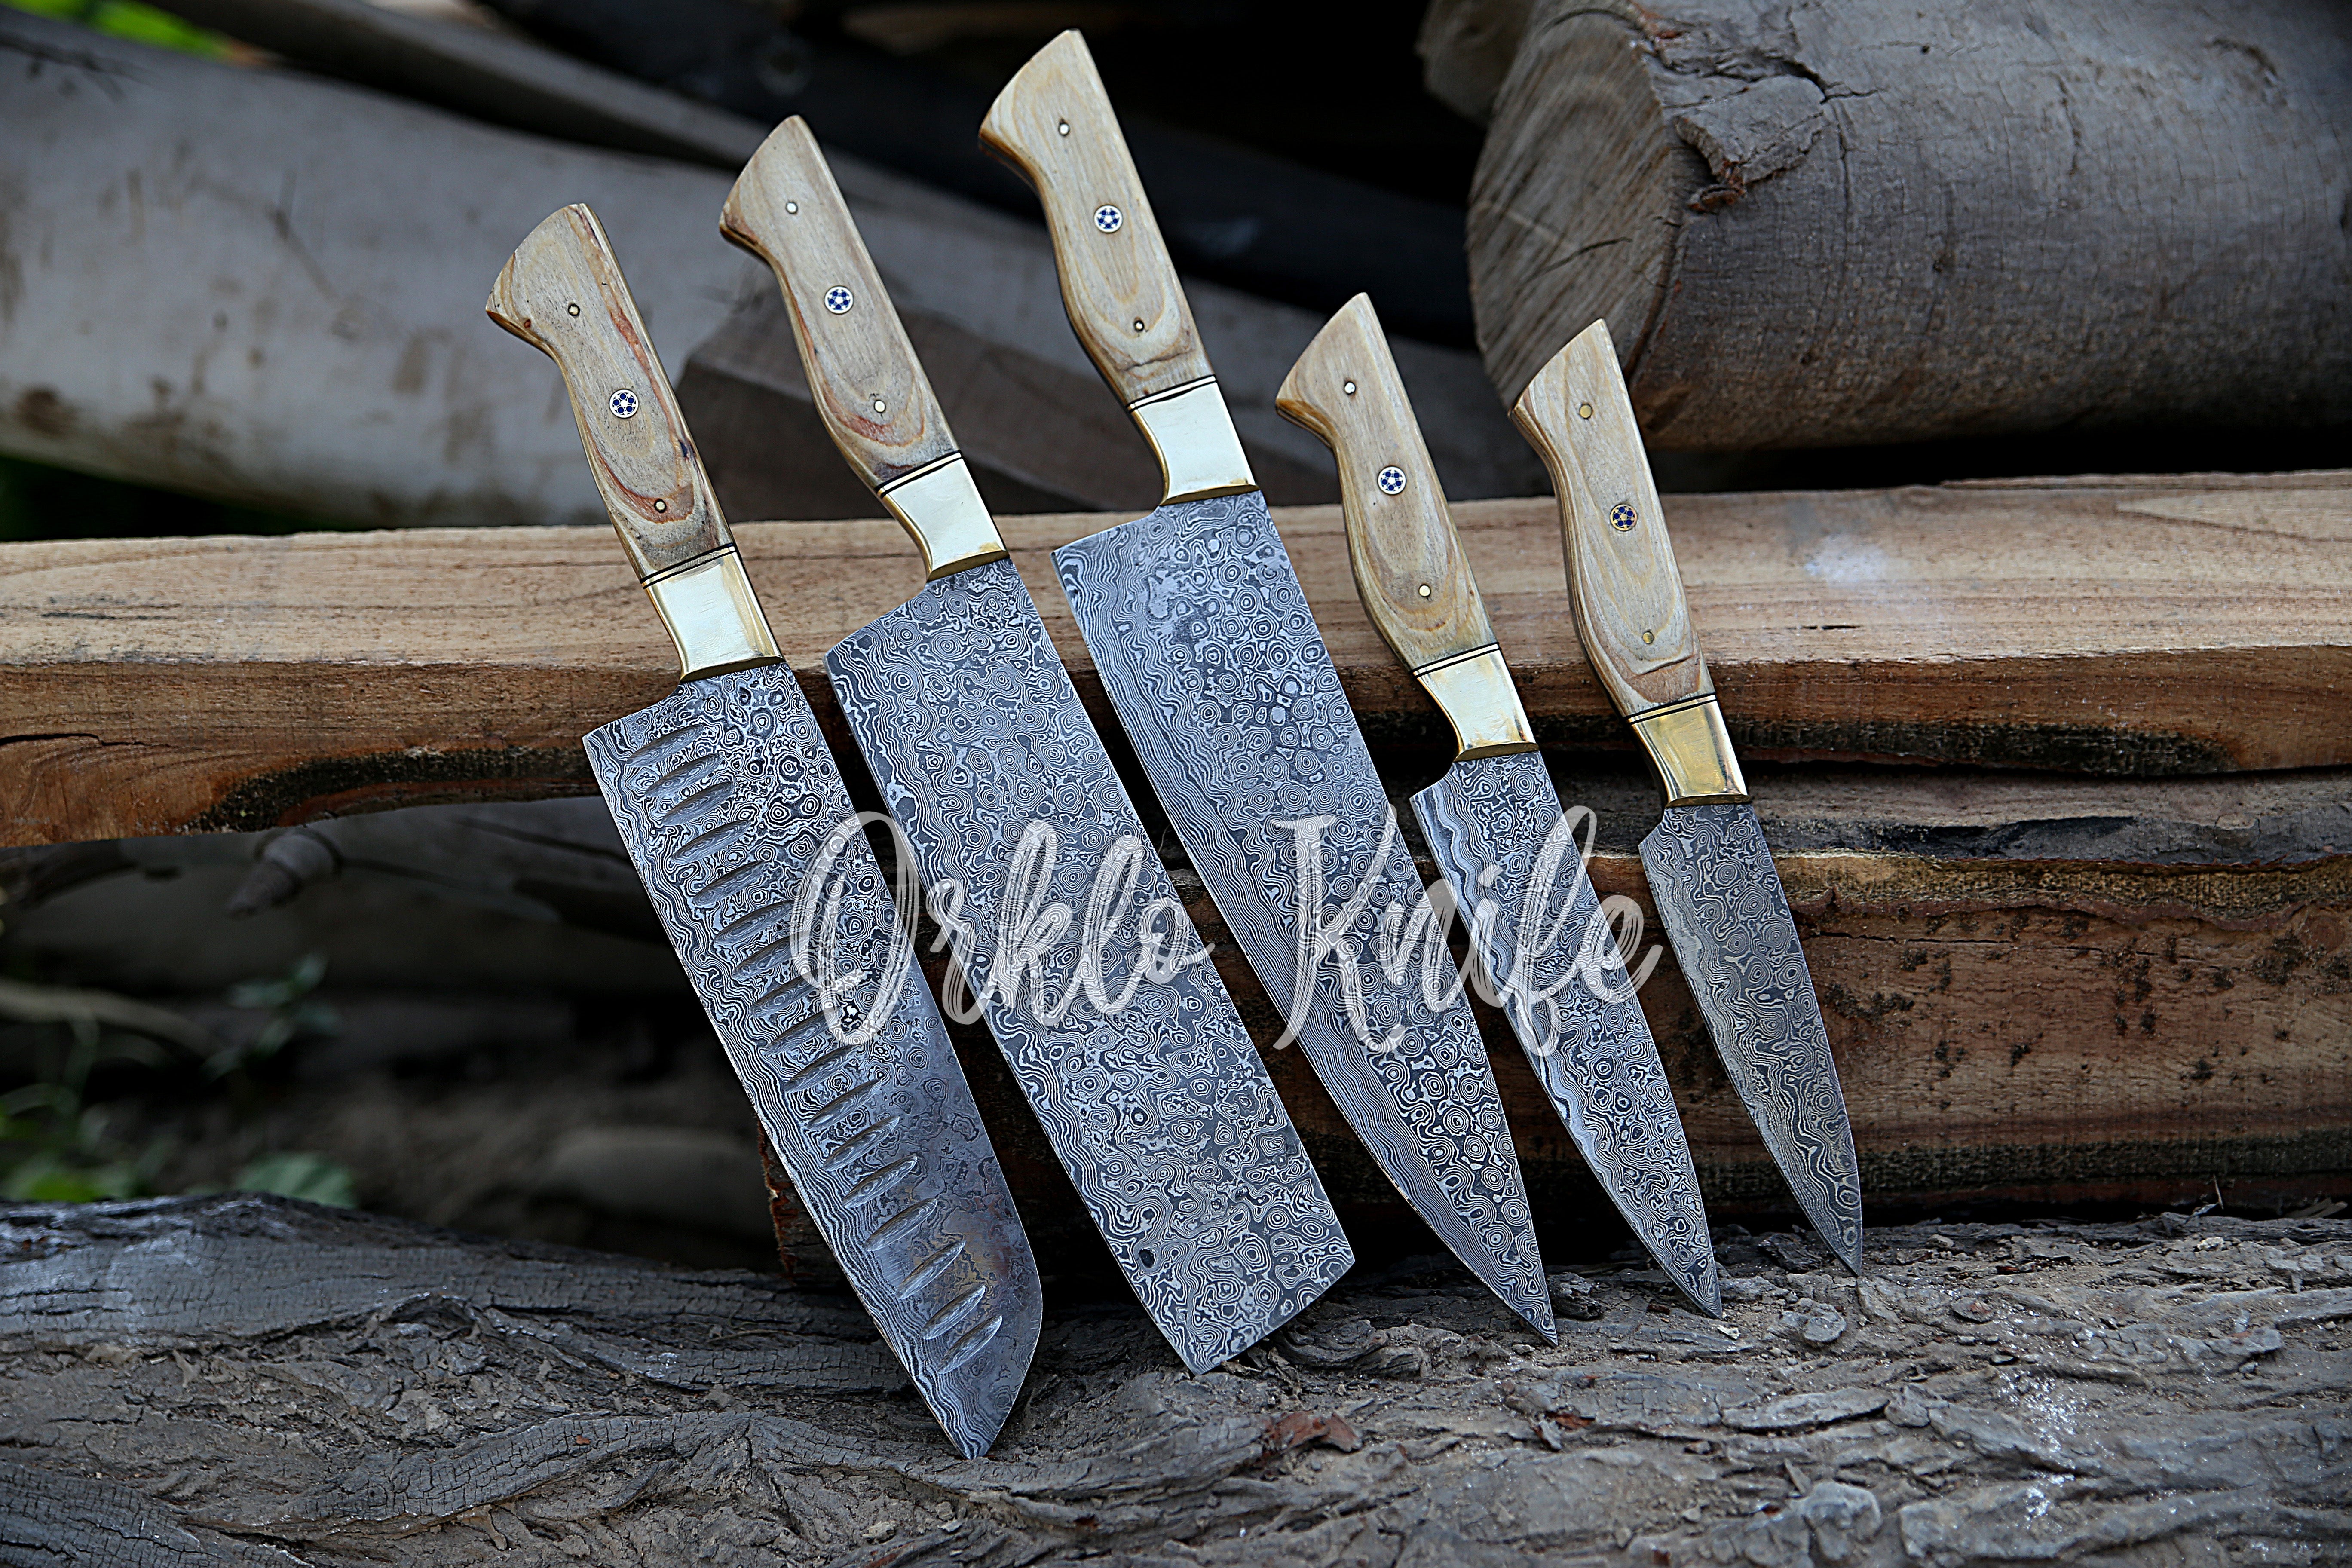 Damascus chef knives set of 5 Damascus knives